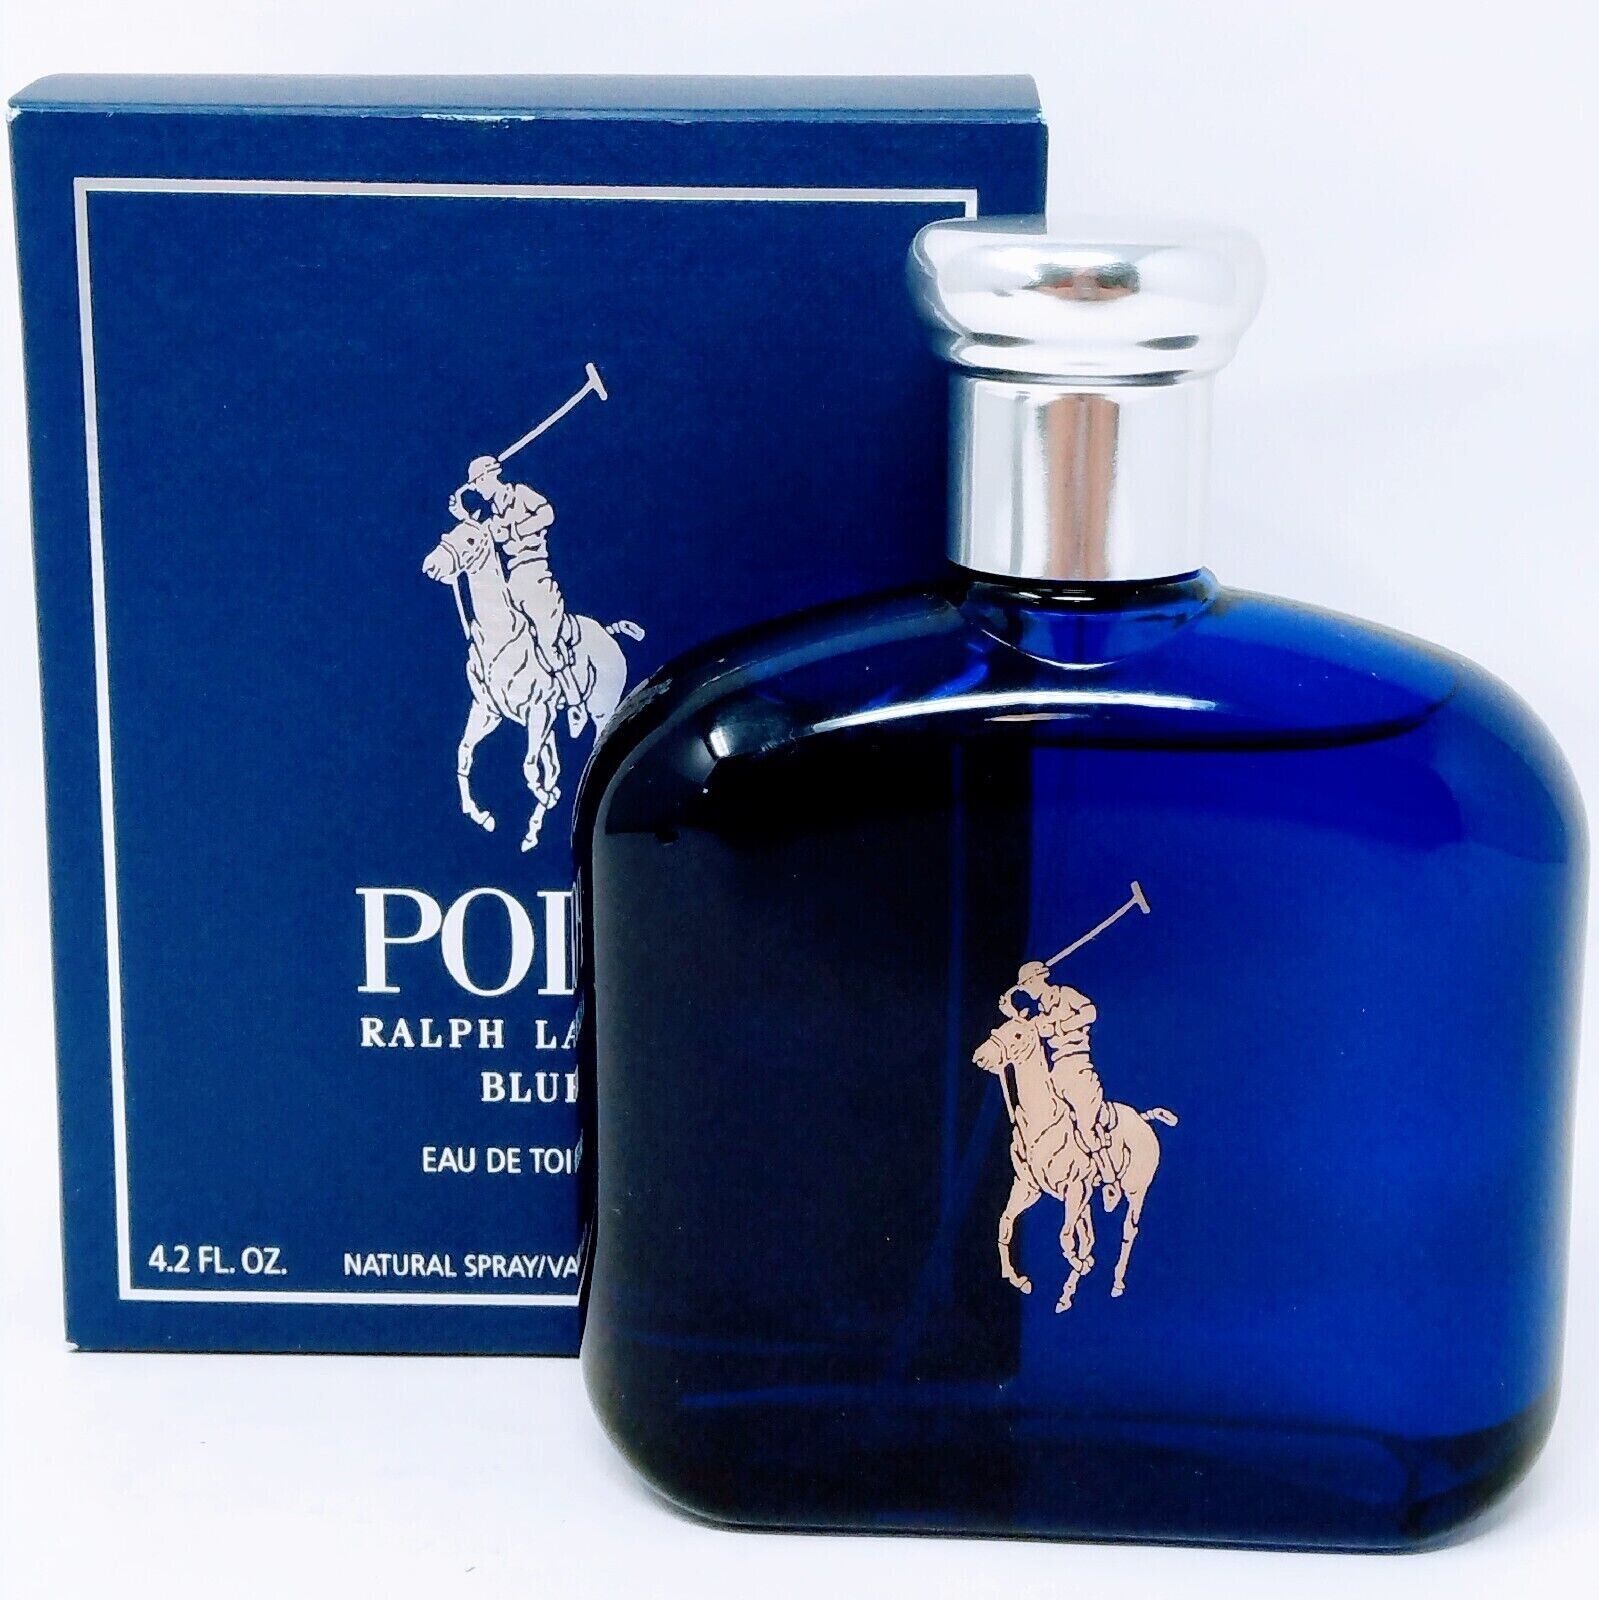 Polo Blue by Ralph Lauren EDT Spray 4.2 oz for men Sealed in Box NEW